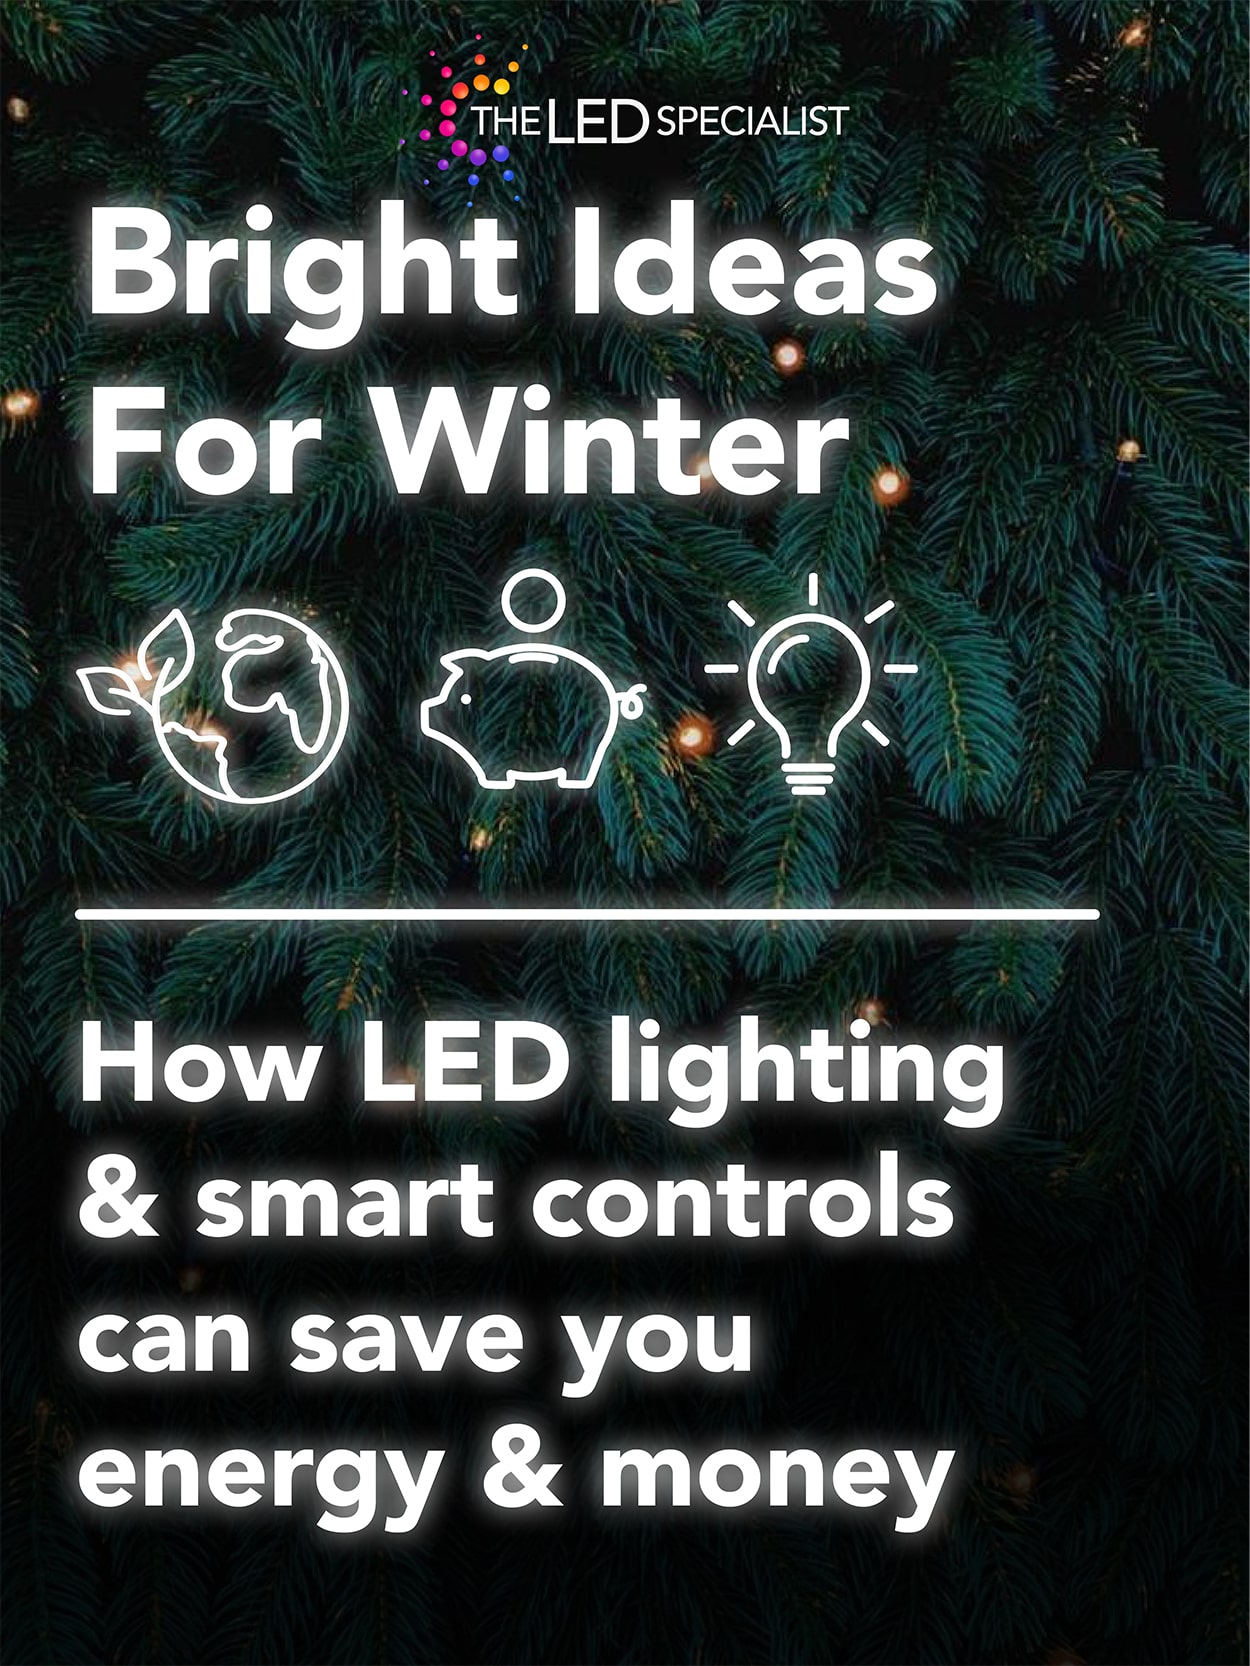 energy-saving-ideas-from-the-led-specialist